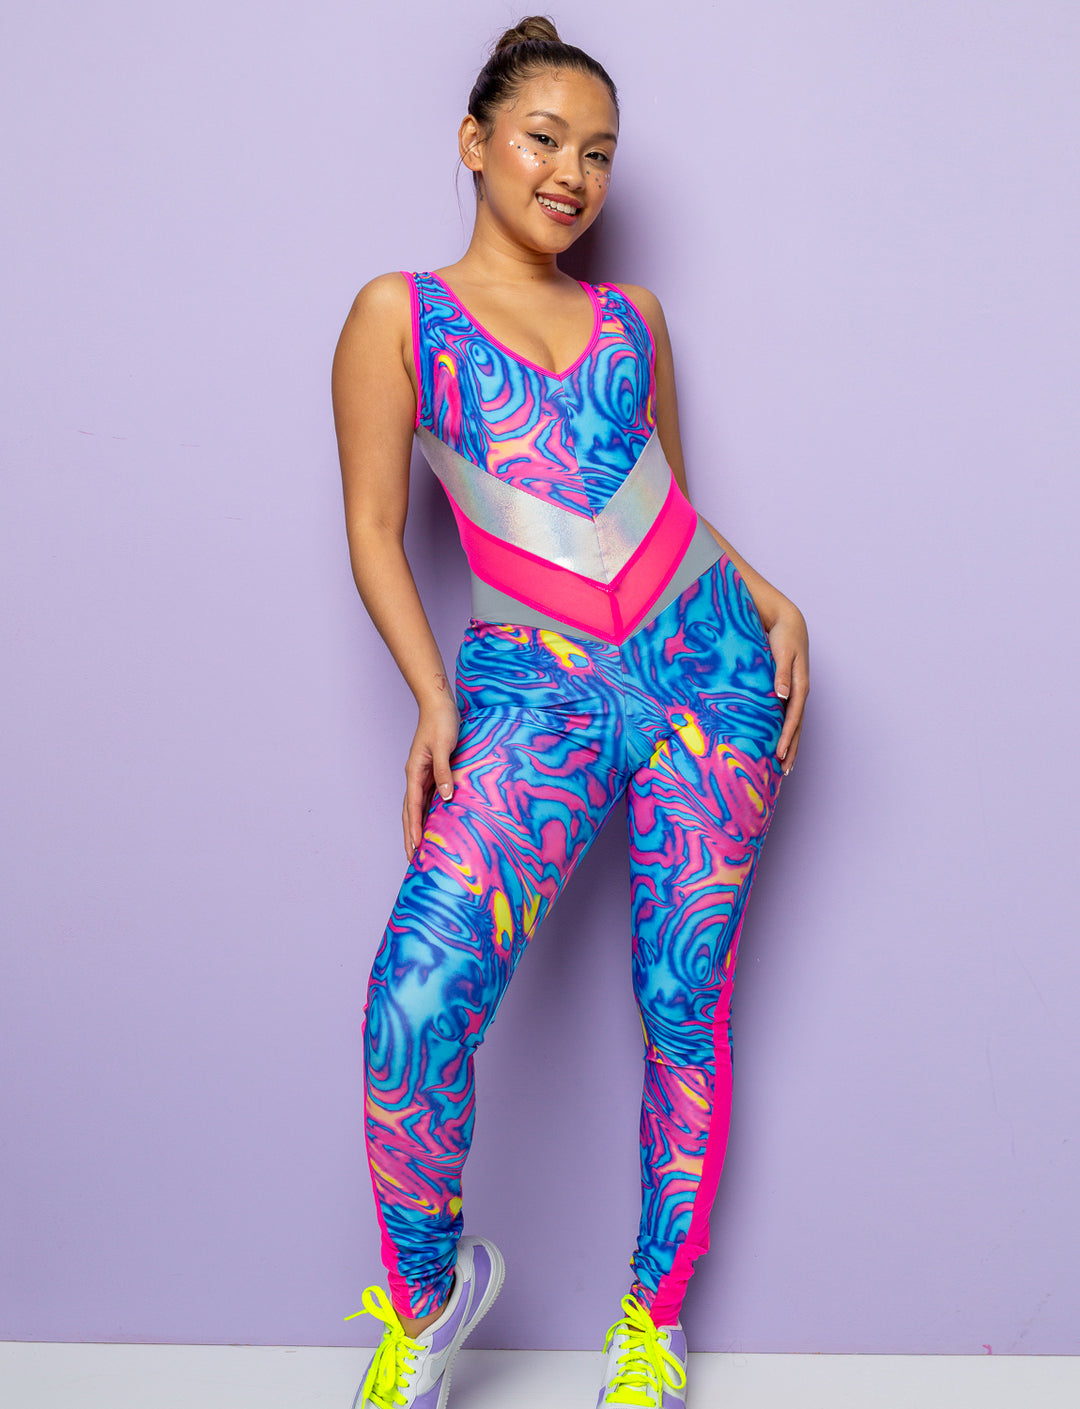 Model wearing a swirly pink and blue patterned lycra catsuit with mesh panels.